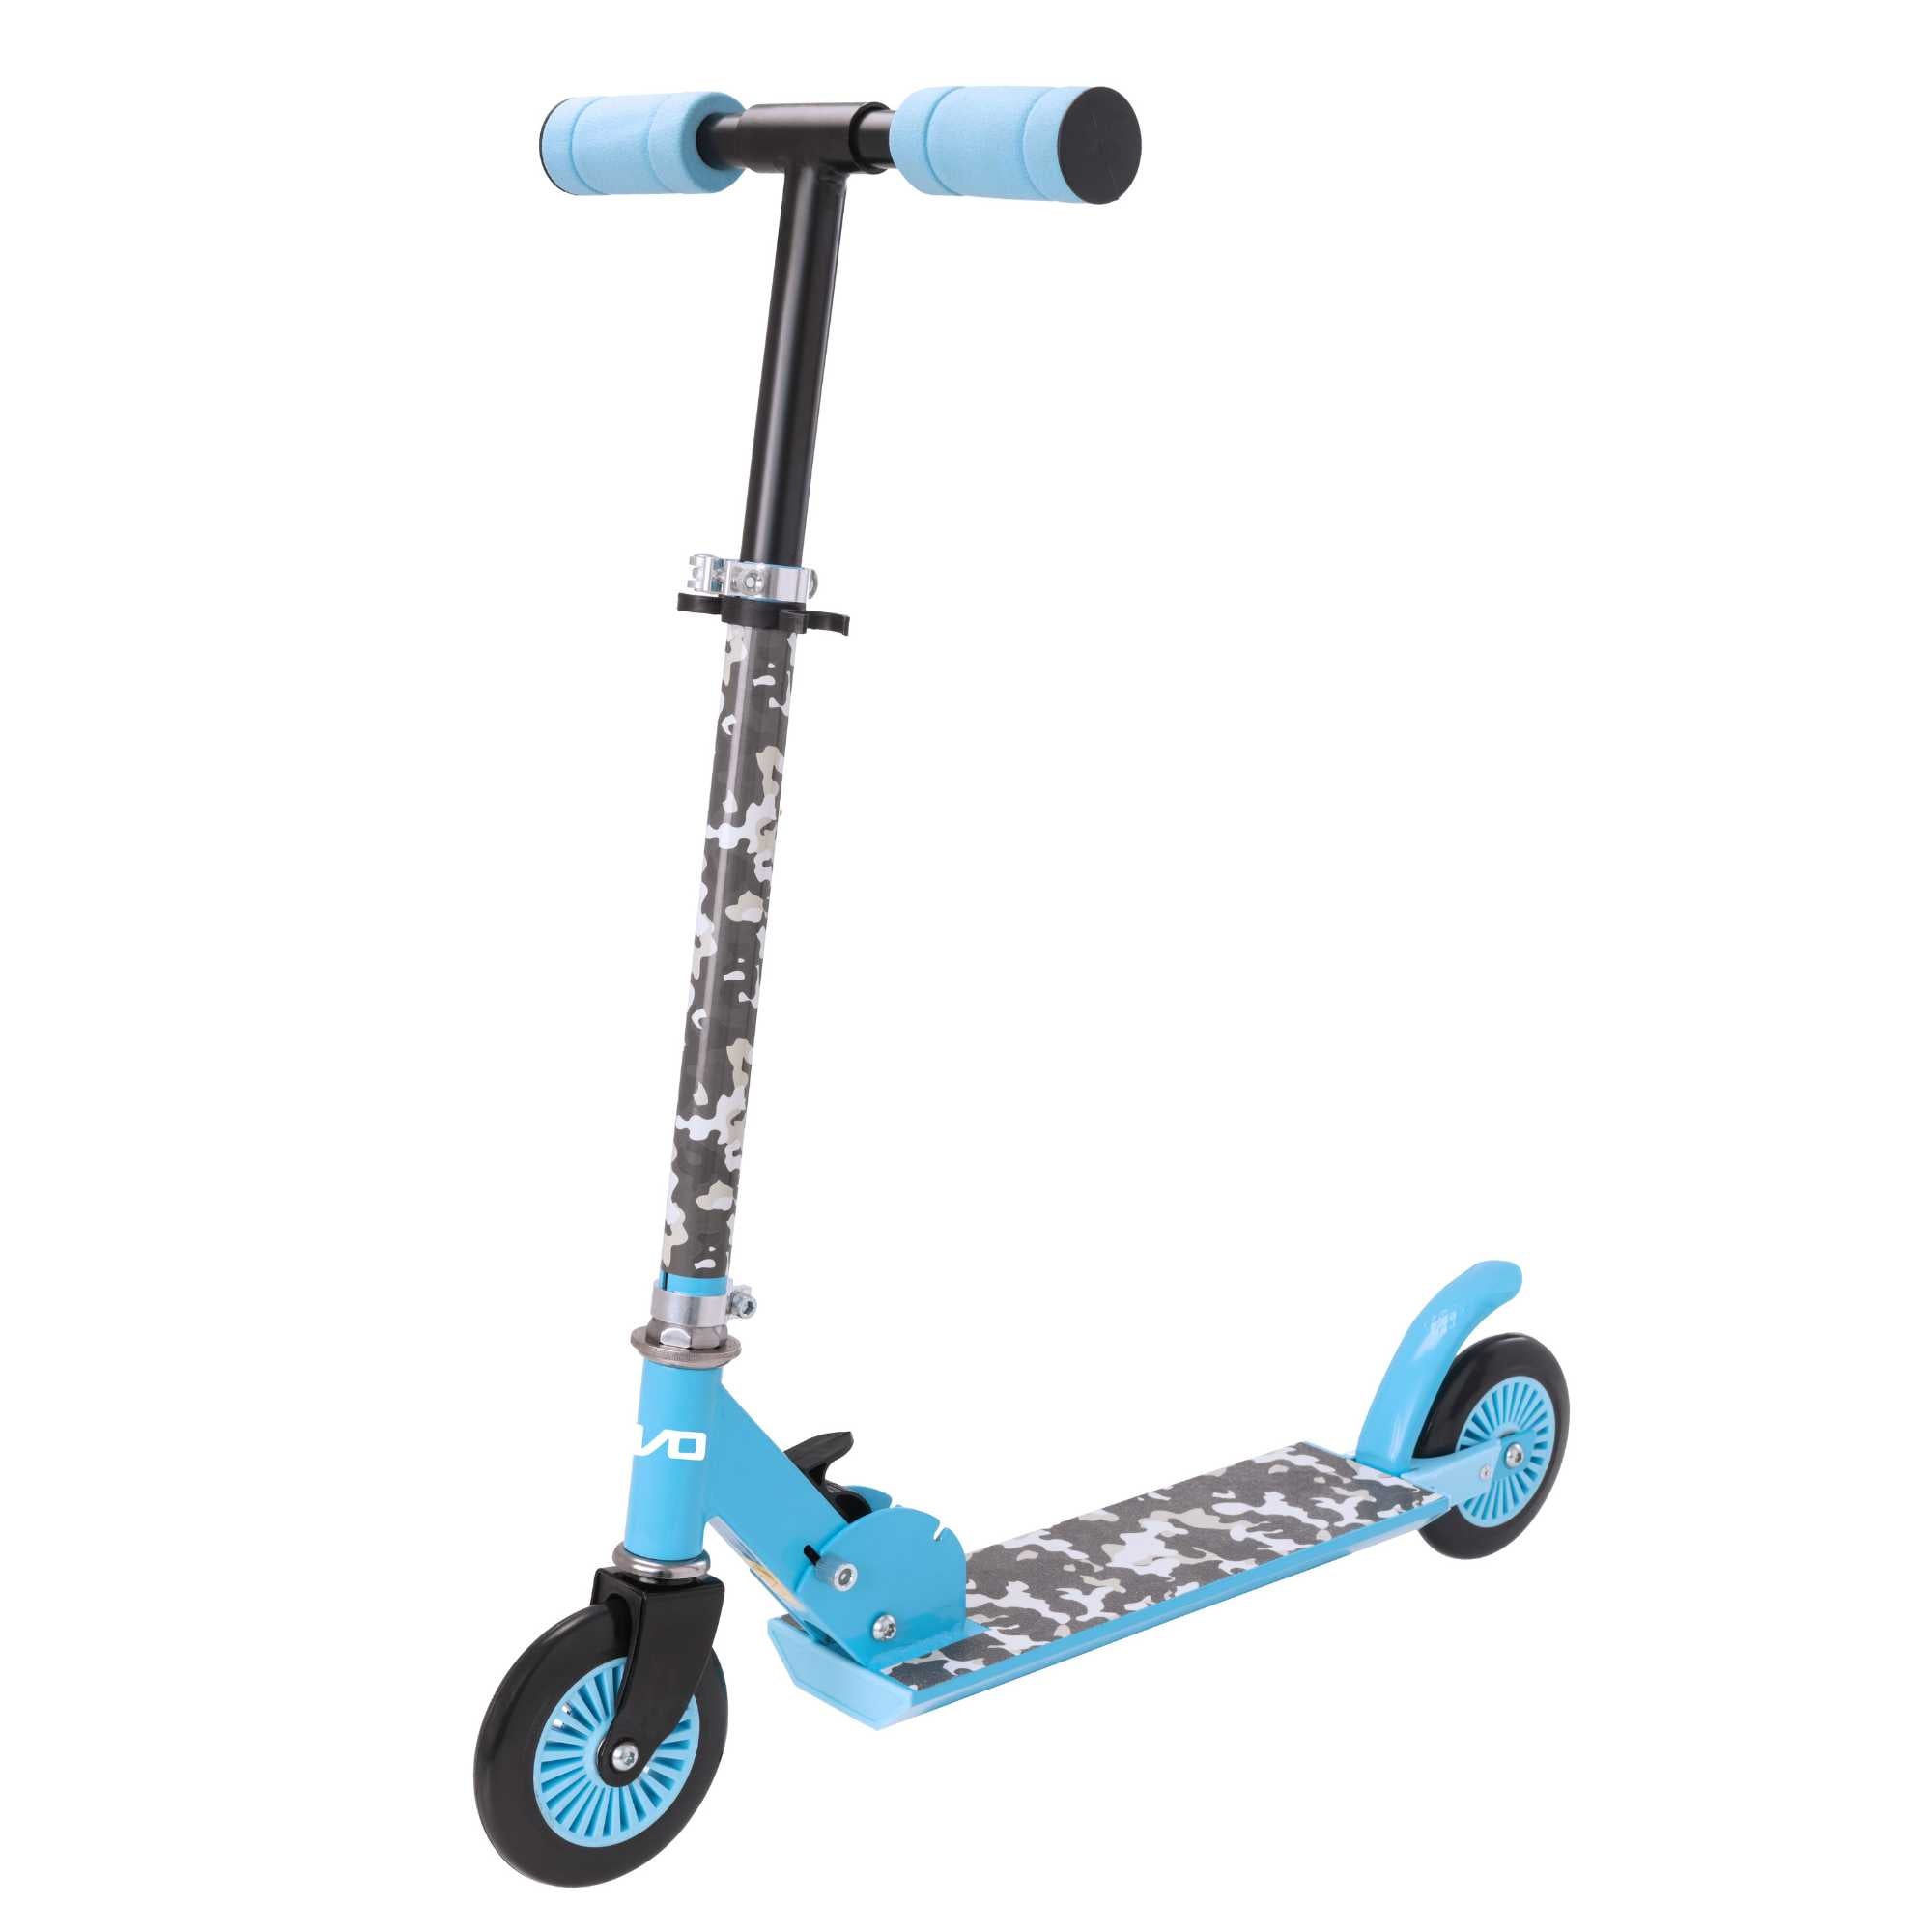 Inline Scooter, Scooter For 5 Year Olds, Push Scooter, Two Wheeled Scooter, Folding Scooter